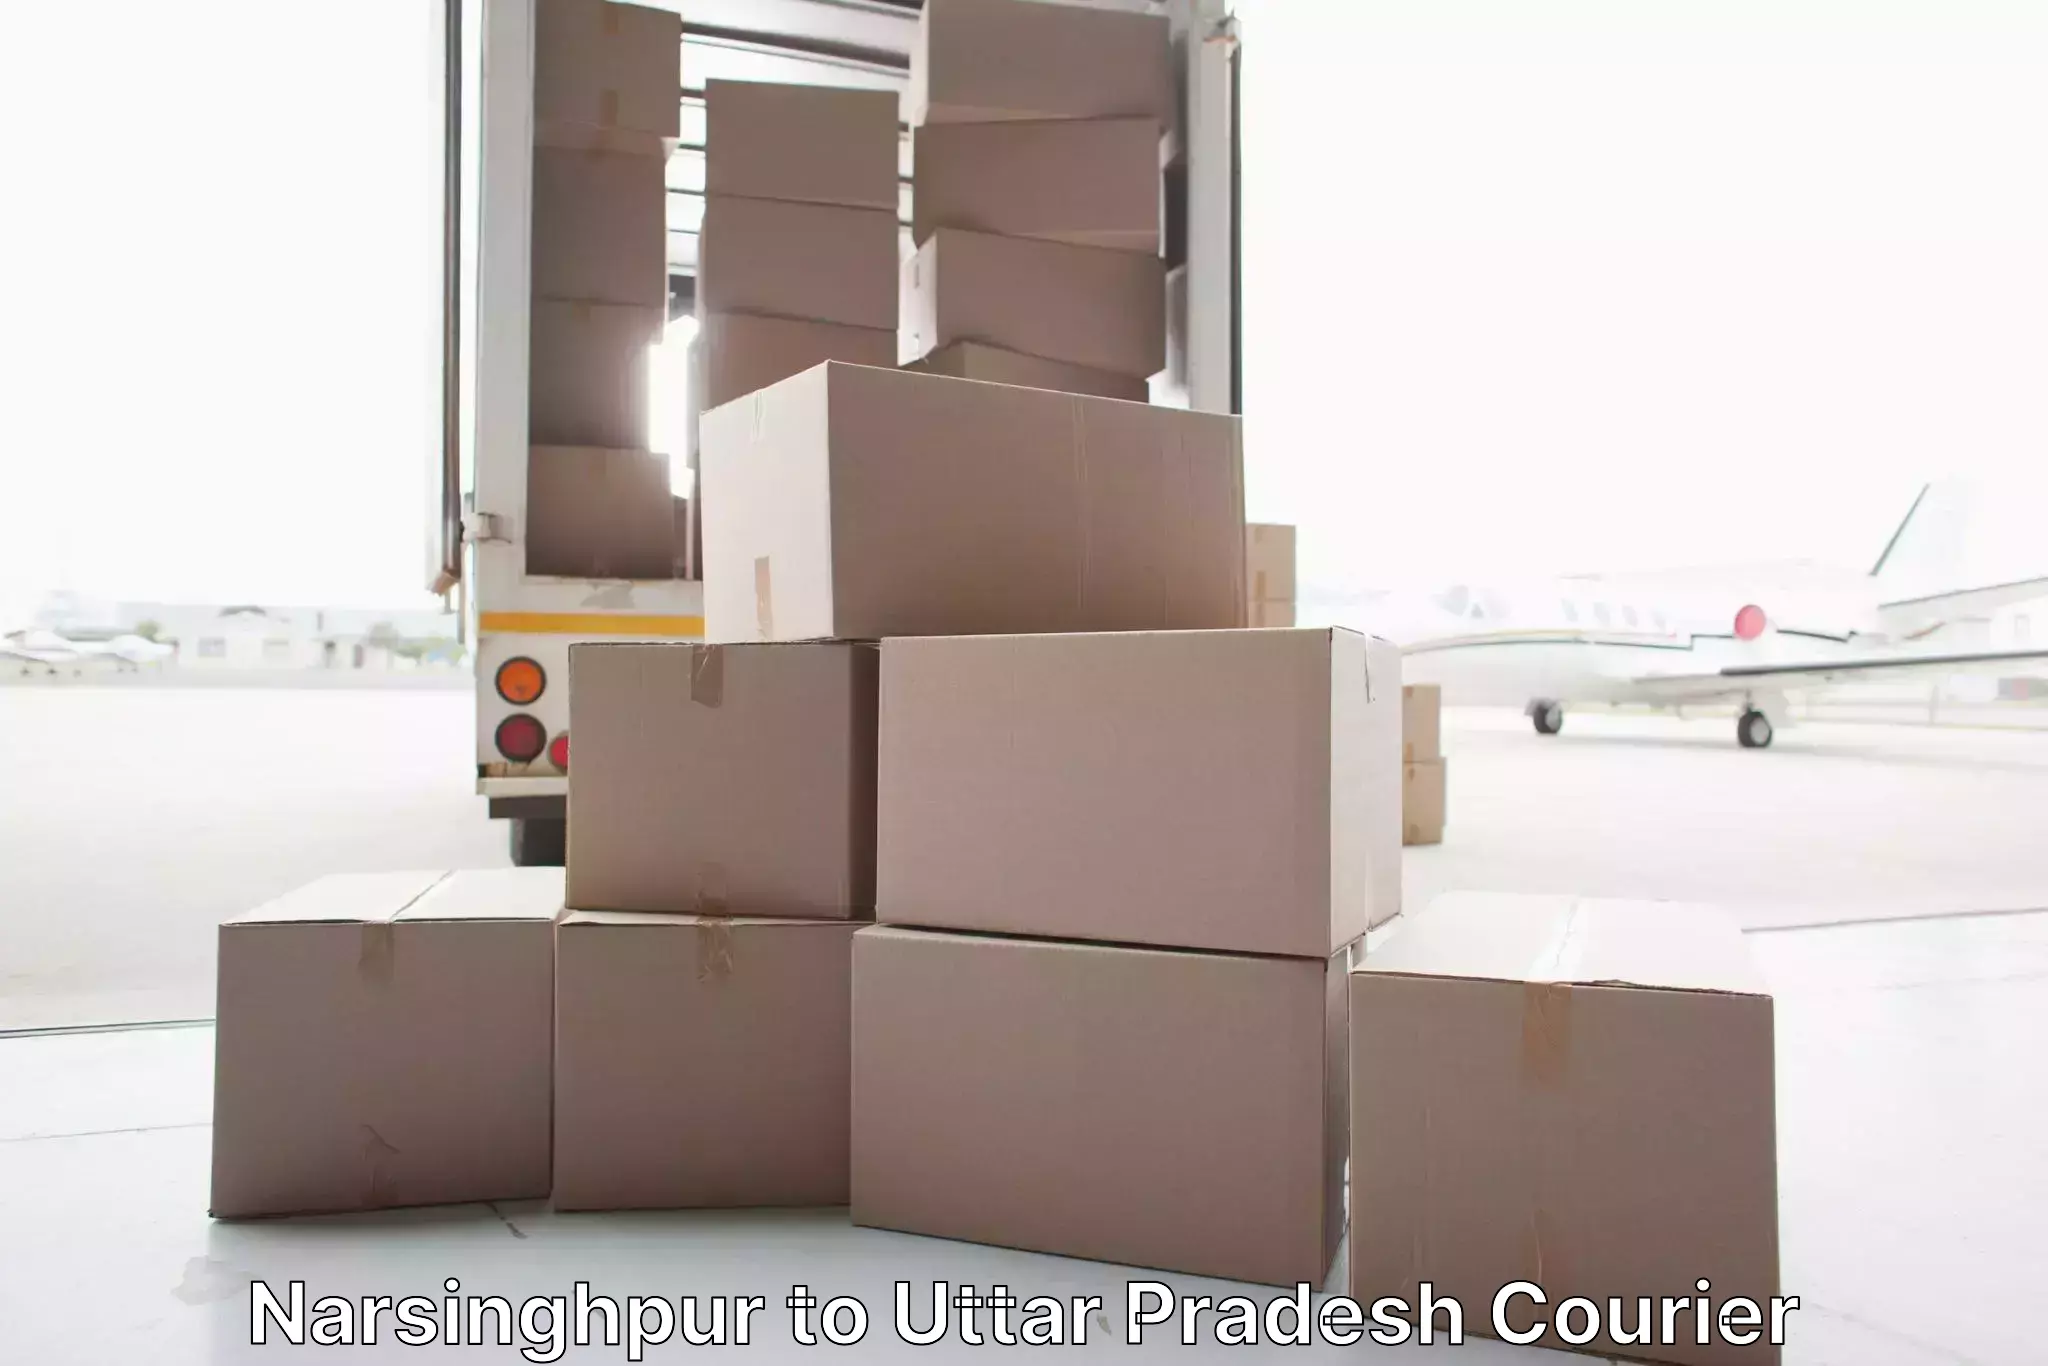 Quality furniture relocation in Narsinghpur to Dayalbagh Educational Institute Agra